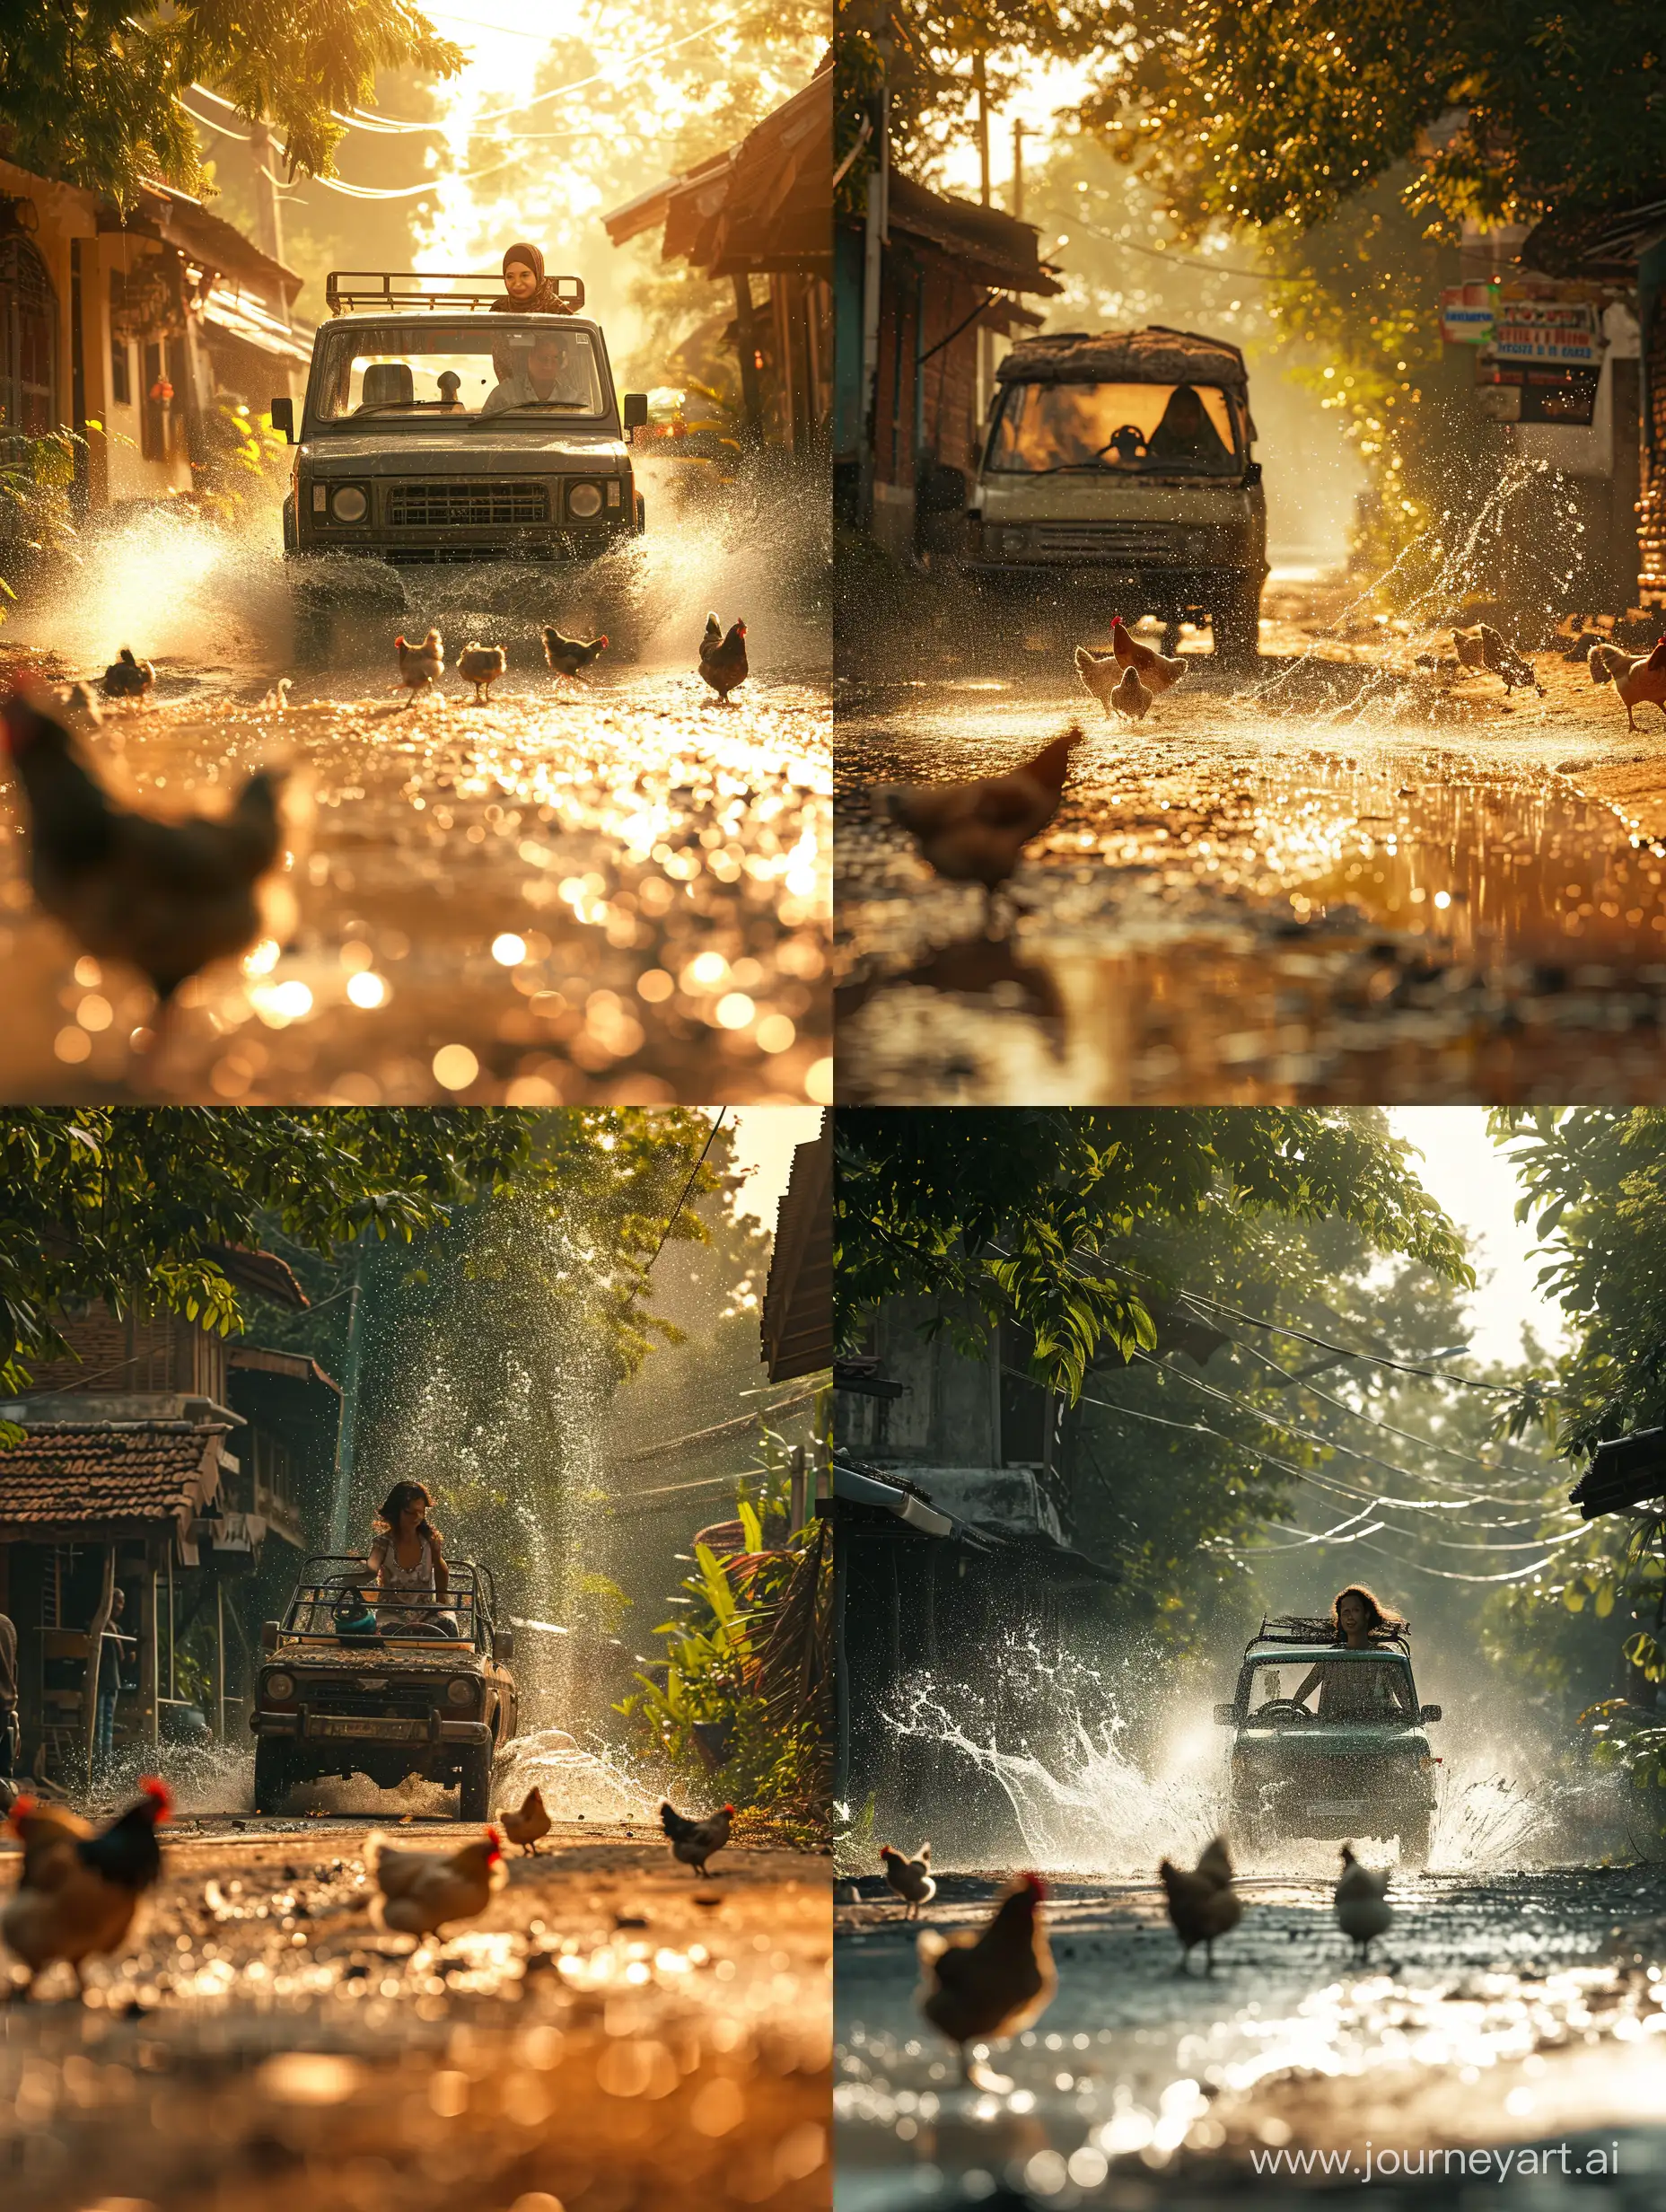 Ultra realistic A MALAY WOMAN RIDING AN UNCOVERED CAR, THROUGH A VILLAGE ROAD WITH SUNLIGHT IN THE MORNING ATMOSPHERE. there are chickens running around. on the ground there is a splash of water. canon eos-id x mark iii dslr --v 6.0